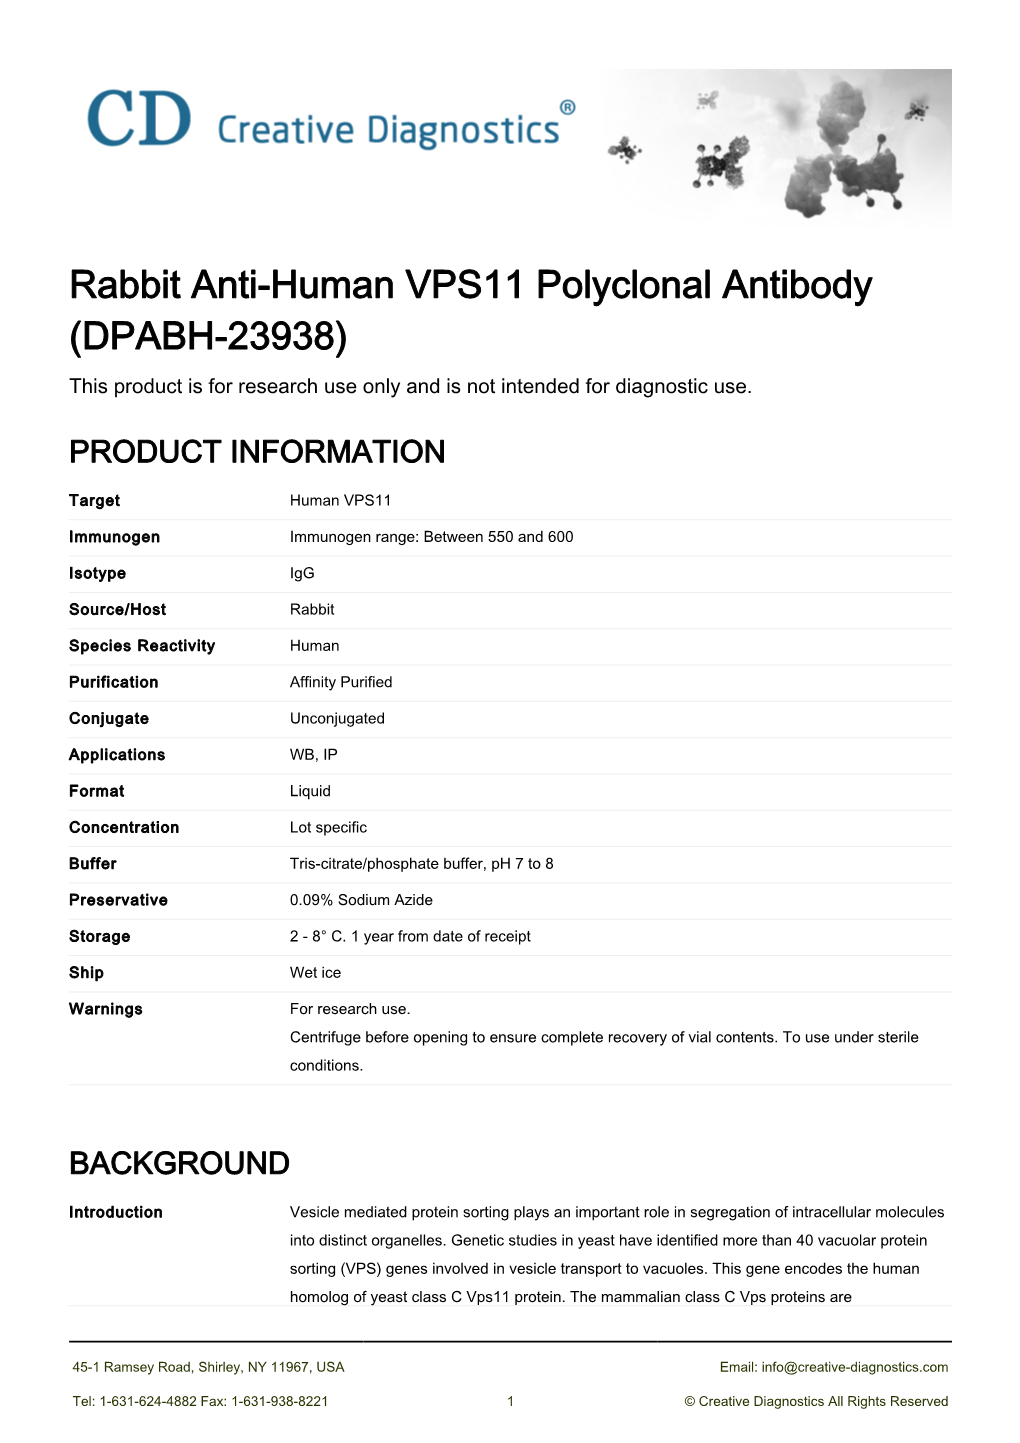 Rabbit Anti-Human VPS11 Polyclonal Antibody (DPABH-23938) This Product Is for Research Use Only and Is Not Intended for Diagnostic Use